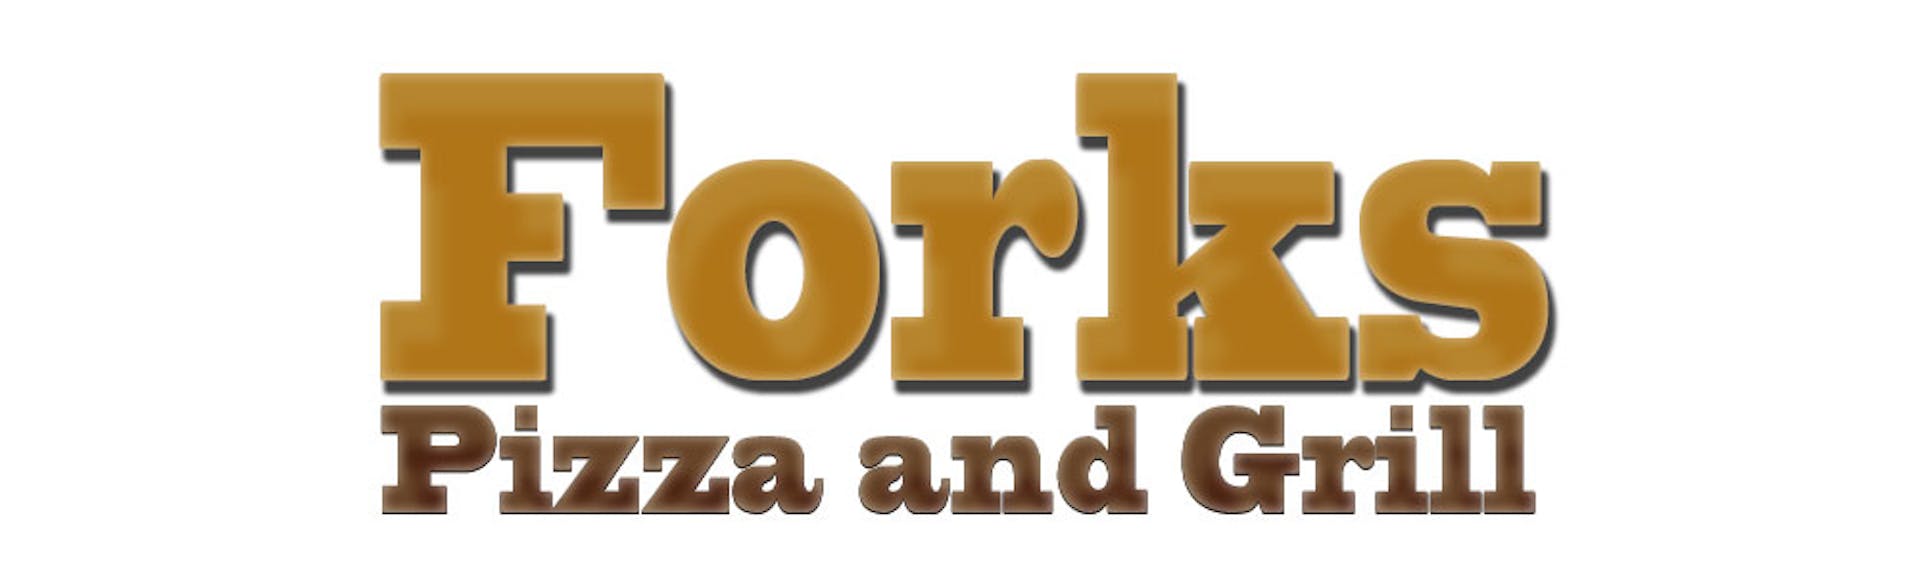 Forks Pizza And Grill Easton Pa 18040 Menu Order Online